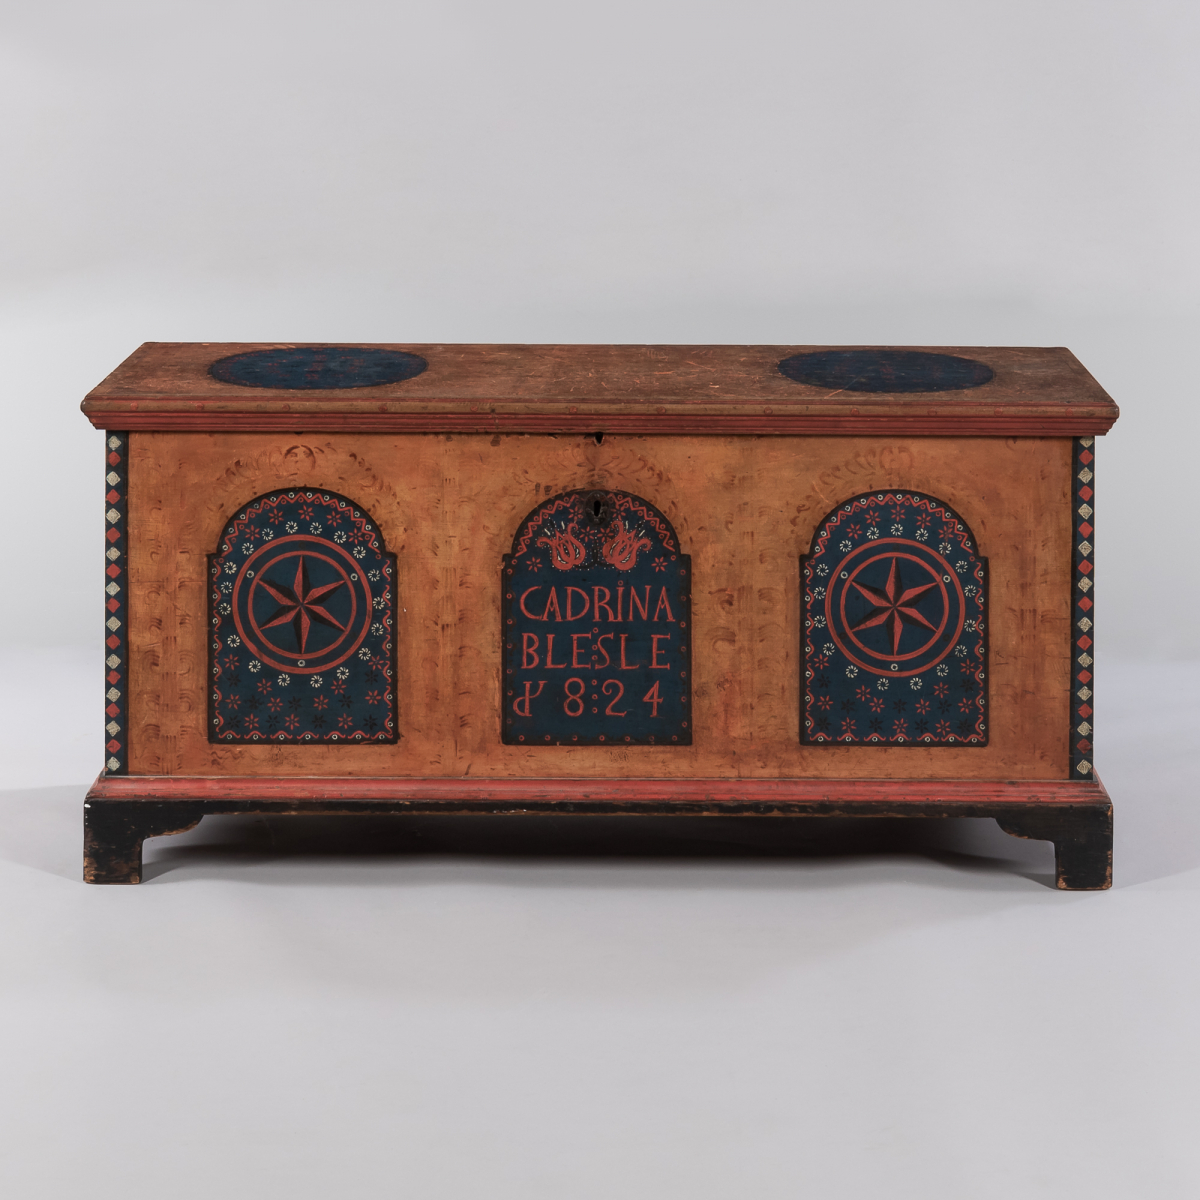 Paint-decorated Dower Chest "Cadrina Blesle/1824," Dauphin County, Pennsylvania, 1824